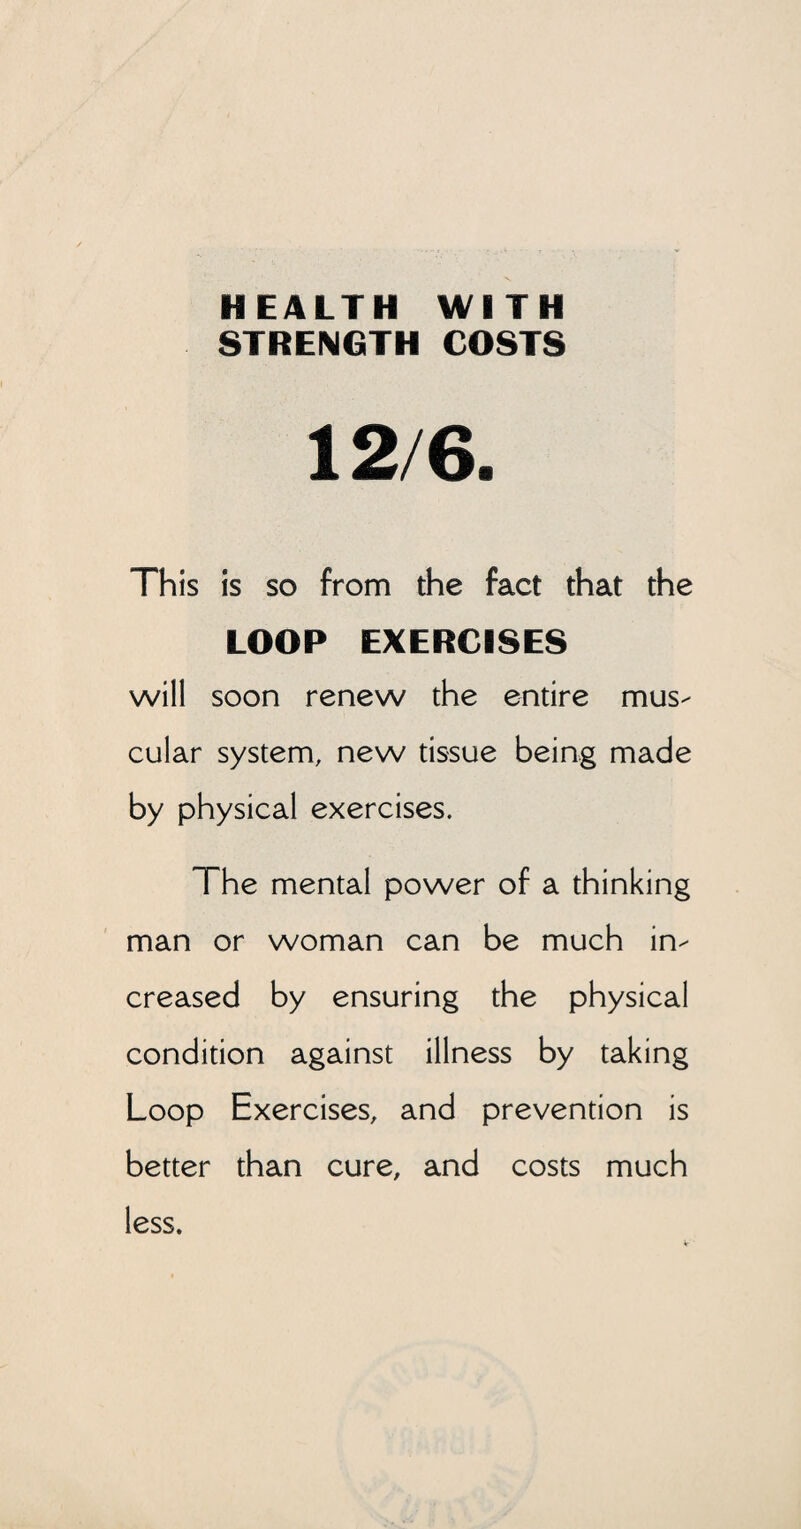 HEALTH WITH STRENGTH COSTS 12/6. This is so from the fact that the LOOP EXERCISES will soon renew the entire mus¬ cular system, new tissue being made by physical exercises. The mental power of a thinking man or woman can be much in¬ creased by ensuring the physical condition against illness by taking Loop Exercises, and prevention is better than cure, and costs much less.